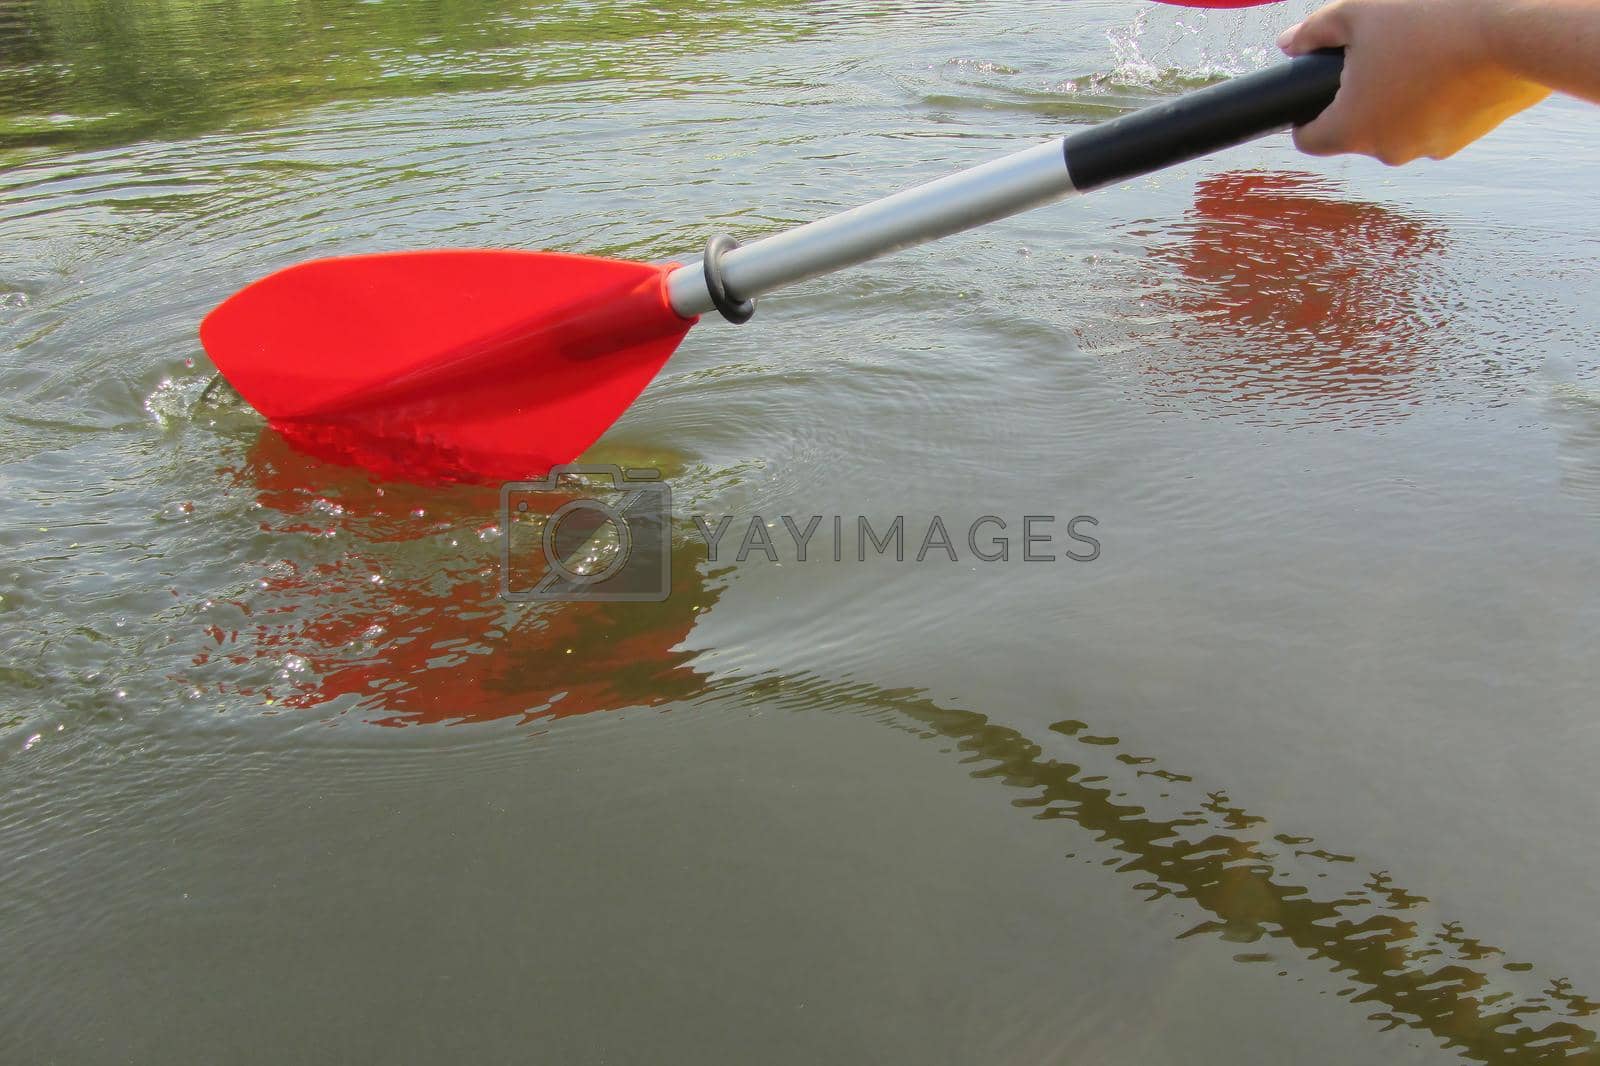 Royalty free image of Red paddles for white water rafting and kayaking. Close up of a hand with red paddle kayaking or rafting on the river, concept of spring water sports. Selective focus. by mr-tigga